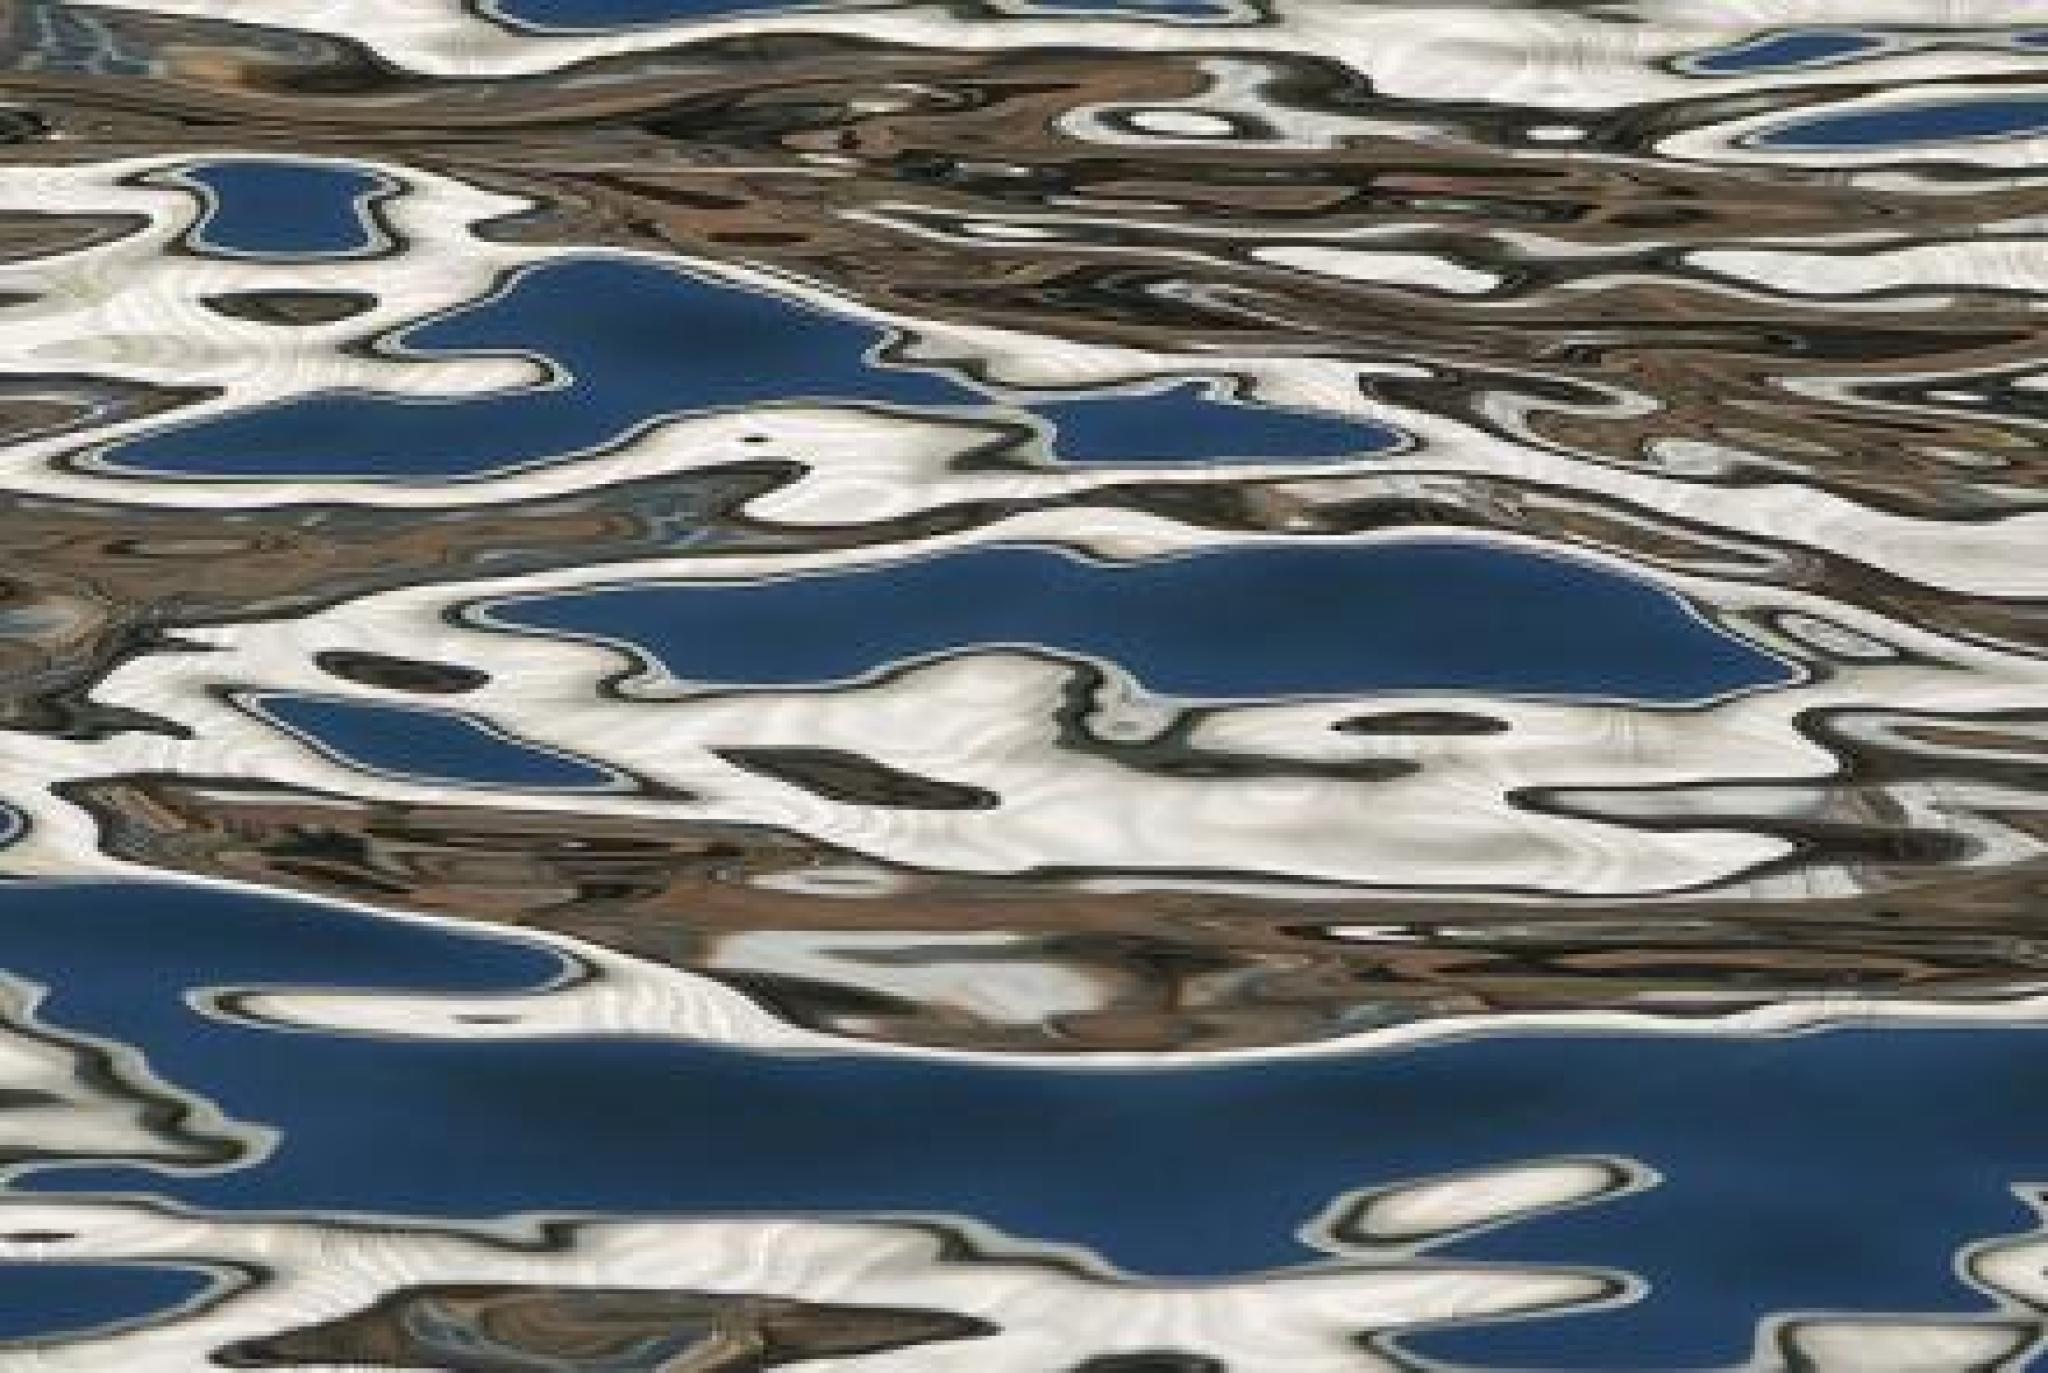 Image: Water Abstract by Dana (Flickr)